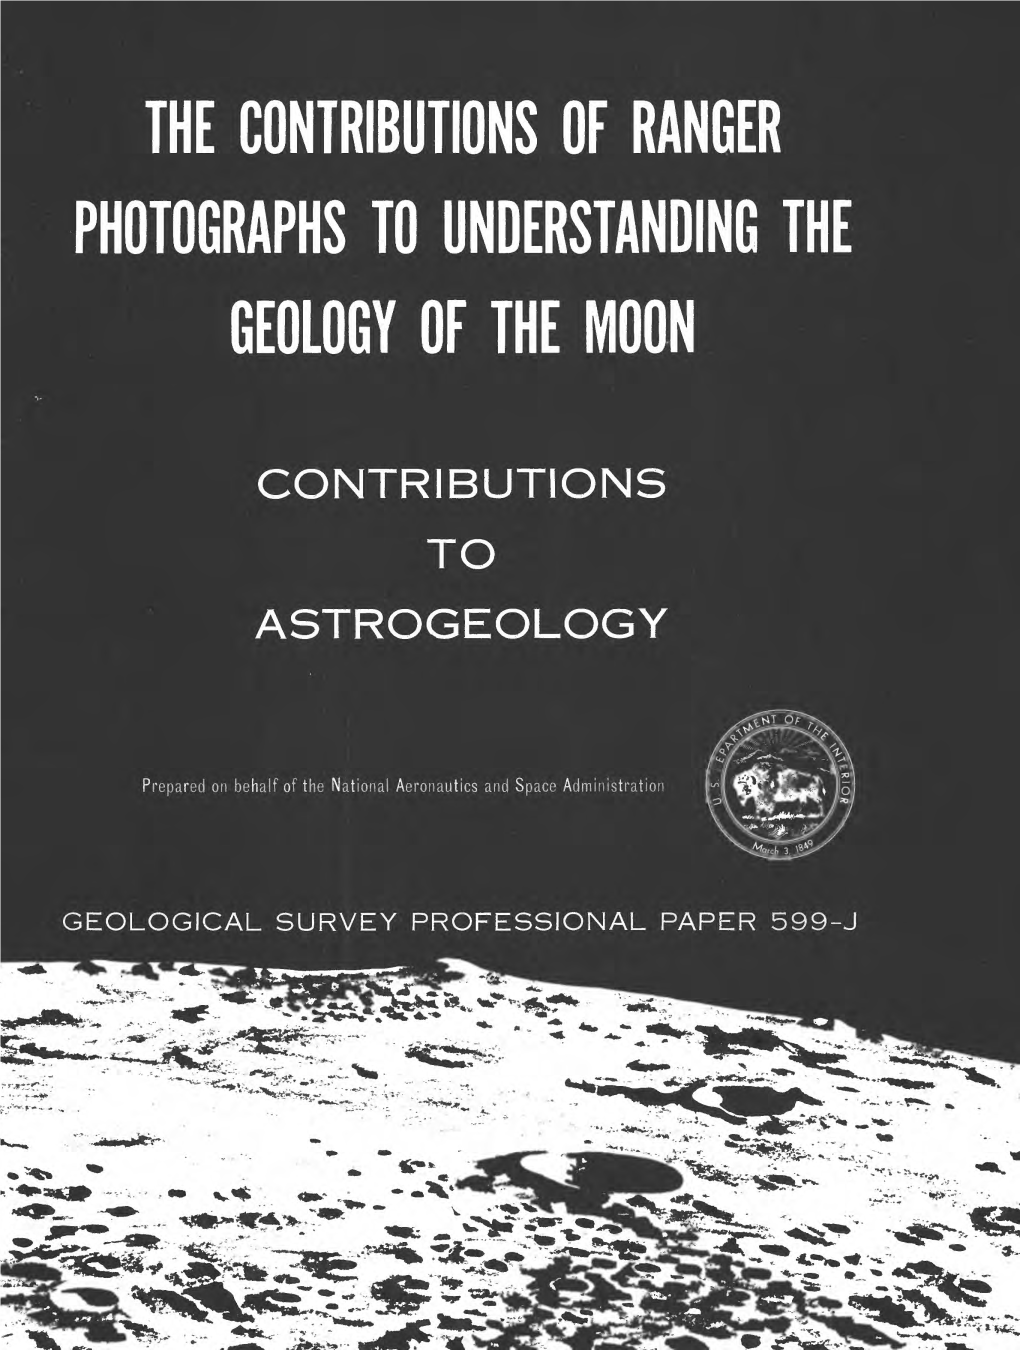 Mm Jo Snoiinaiyinoo ]HI the Contributions of Ranger Photographs to Understanding the Geology of the Moon by N